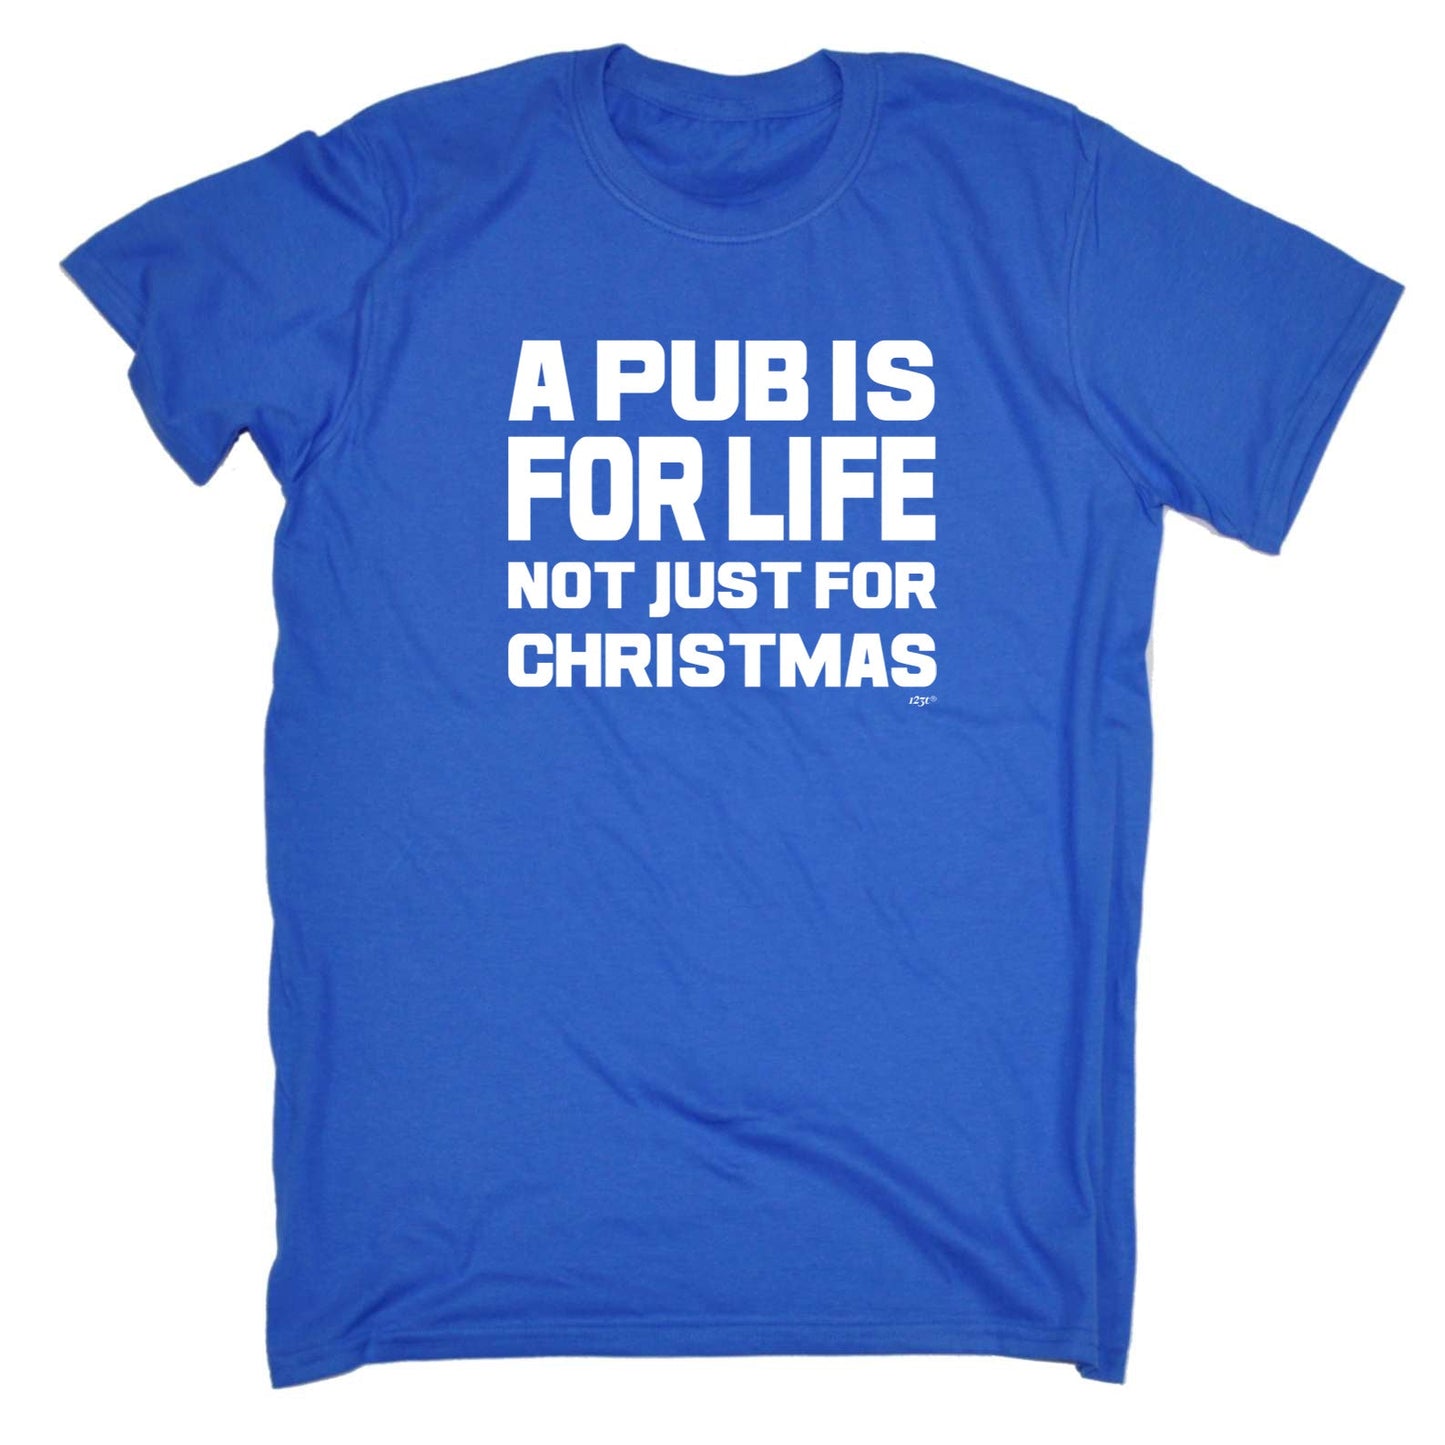 A Pub Is For Life Not Just For Christmas - Mens Funny T-Shirt Tshirts